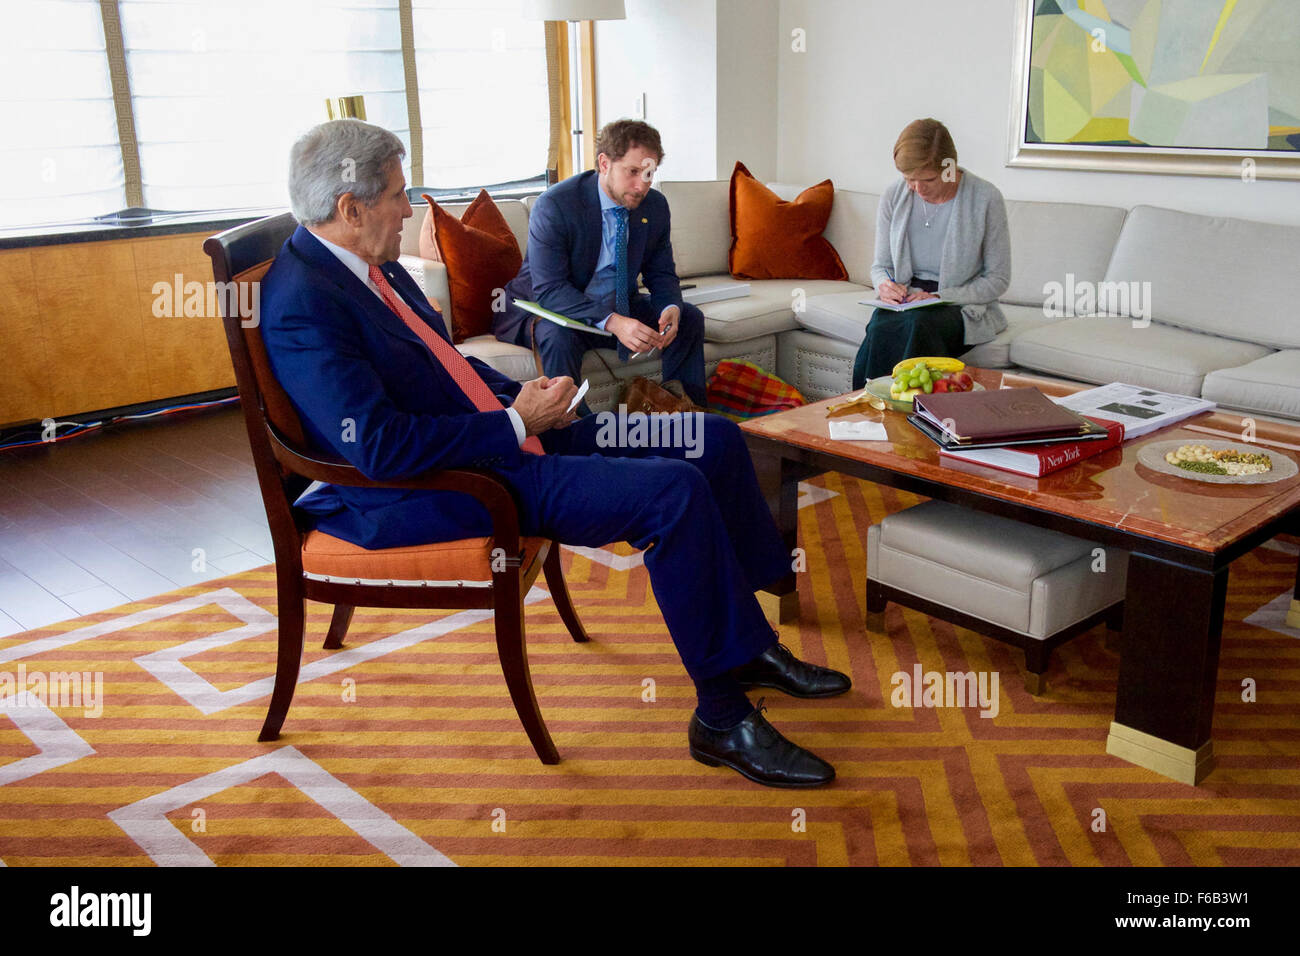 Secretary Kerry Huddles With Chief of Staff Finer and Ambassador Power After Meeting With Russian Foreign Minister Lavrov in New York City Stock Photo